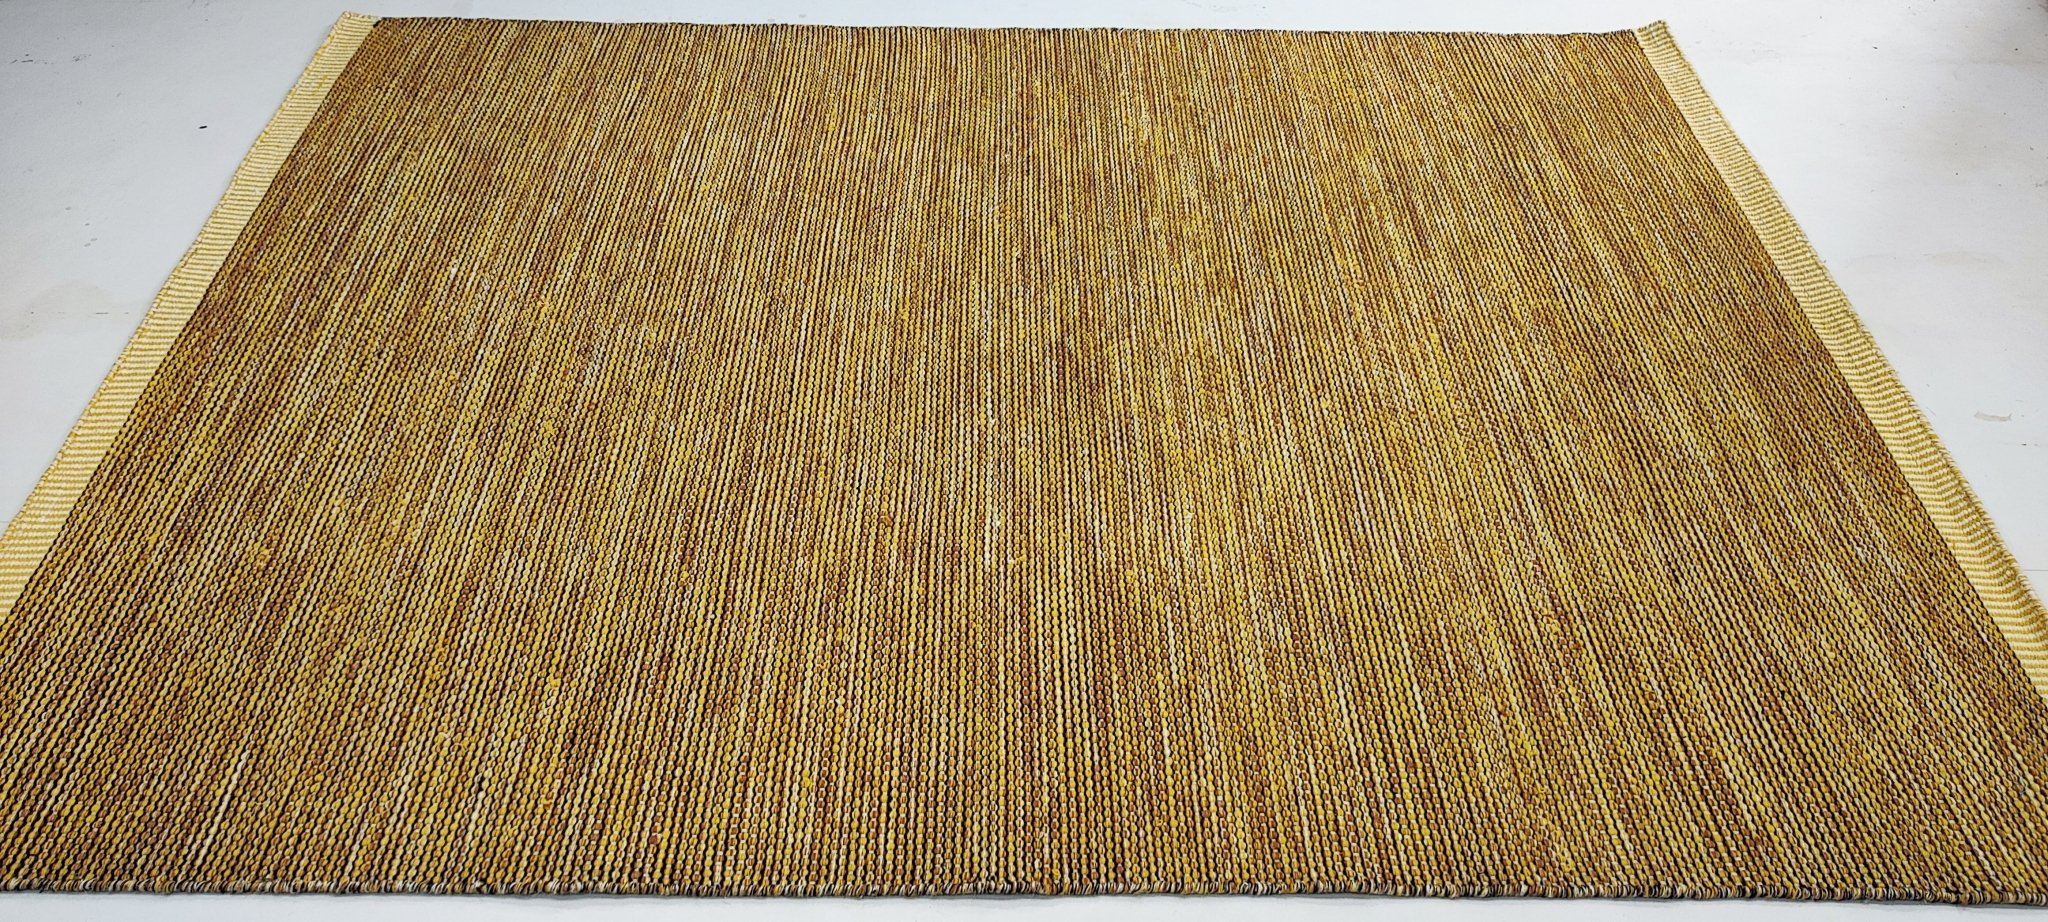 Elks Orleans 5.6x7.6 Handwoven Gold Textured Durrie | Banana Manor Rug Factory Outlet